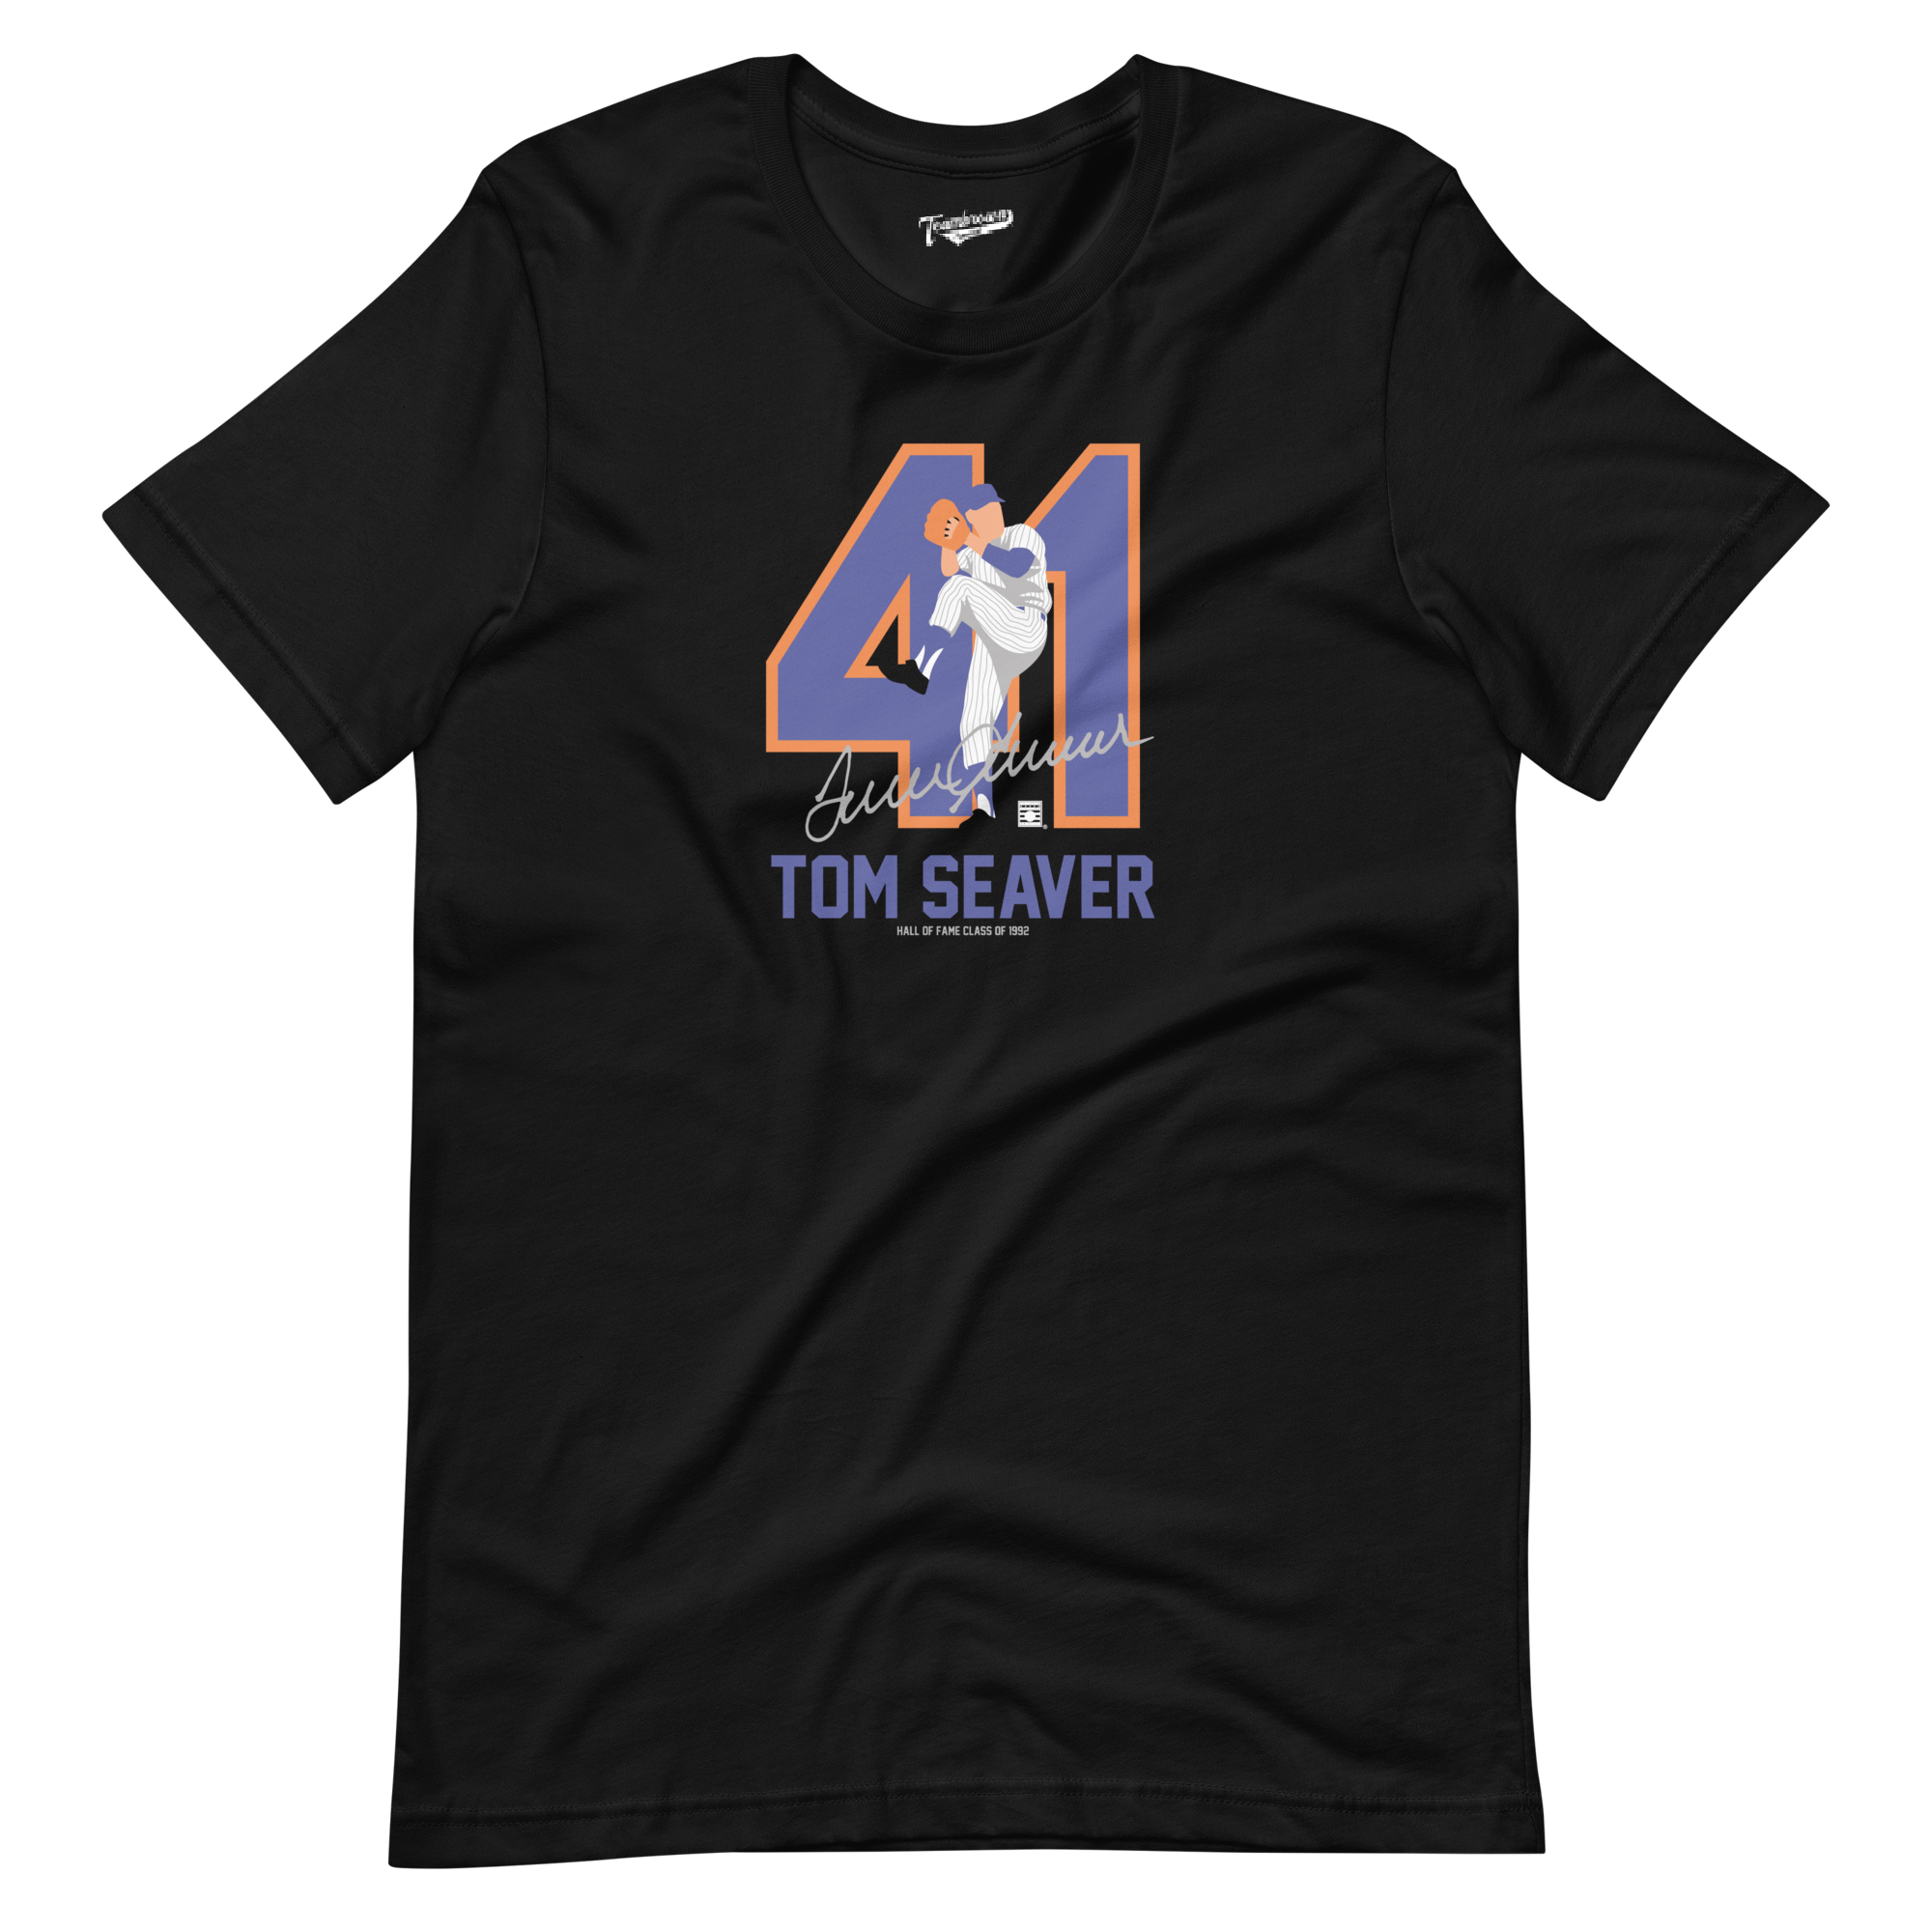 Seaver was a 3-time Cy Young winner and was elected to the Hall in '92